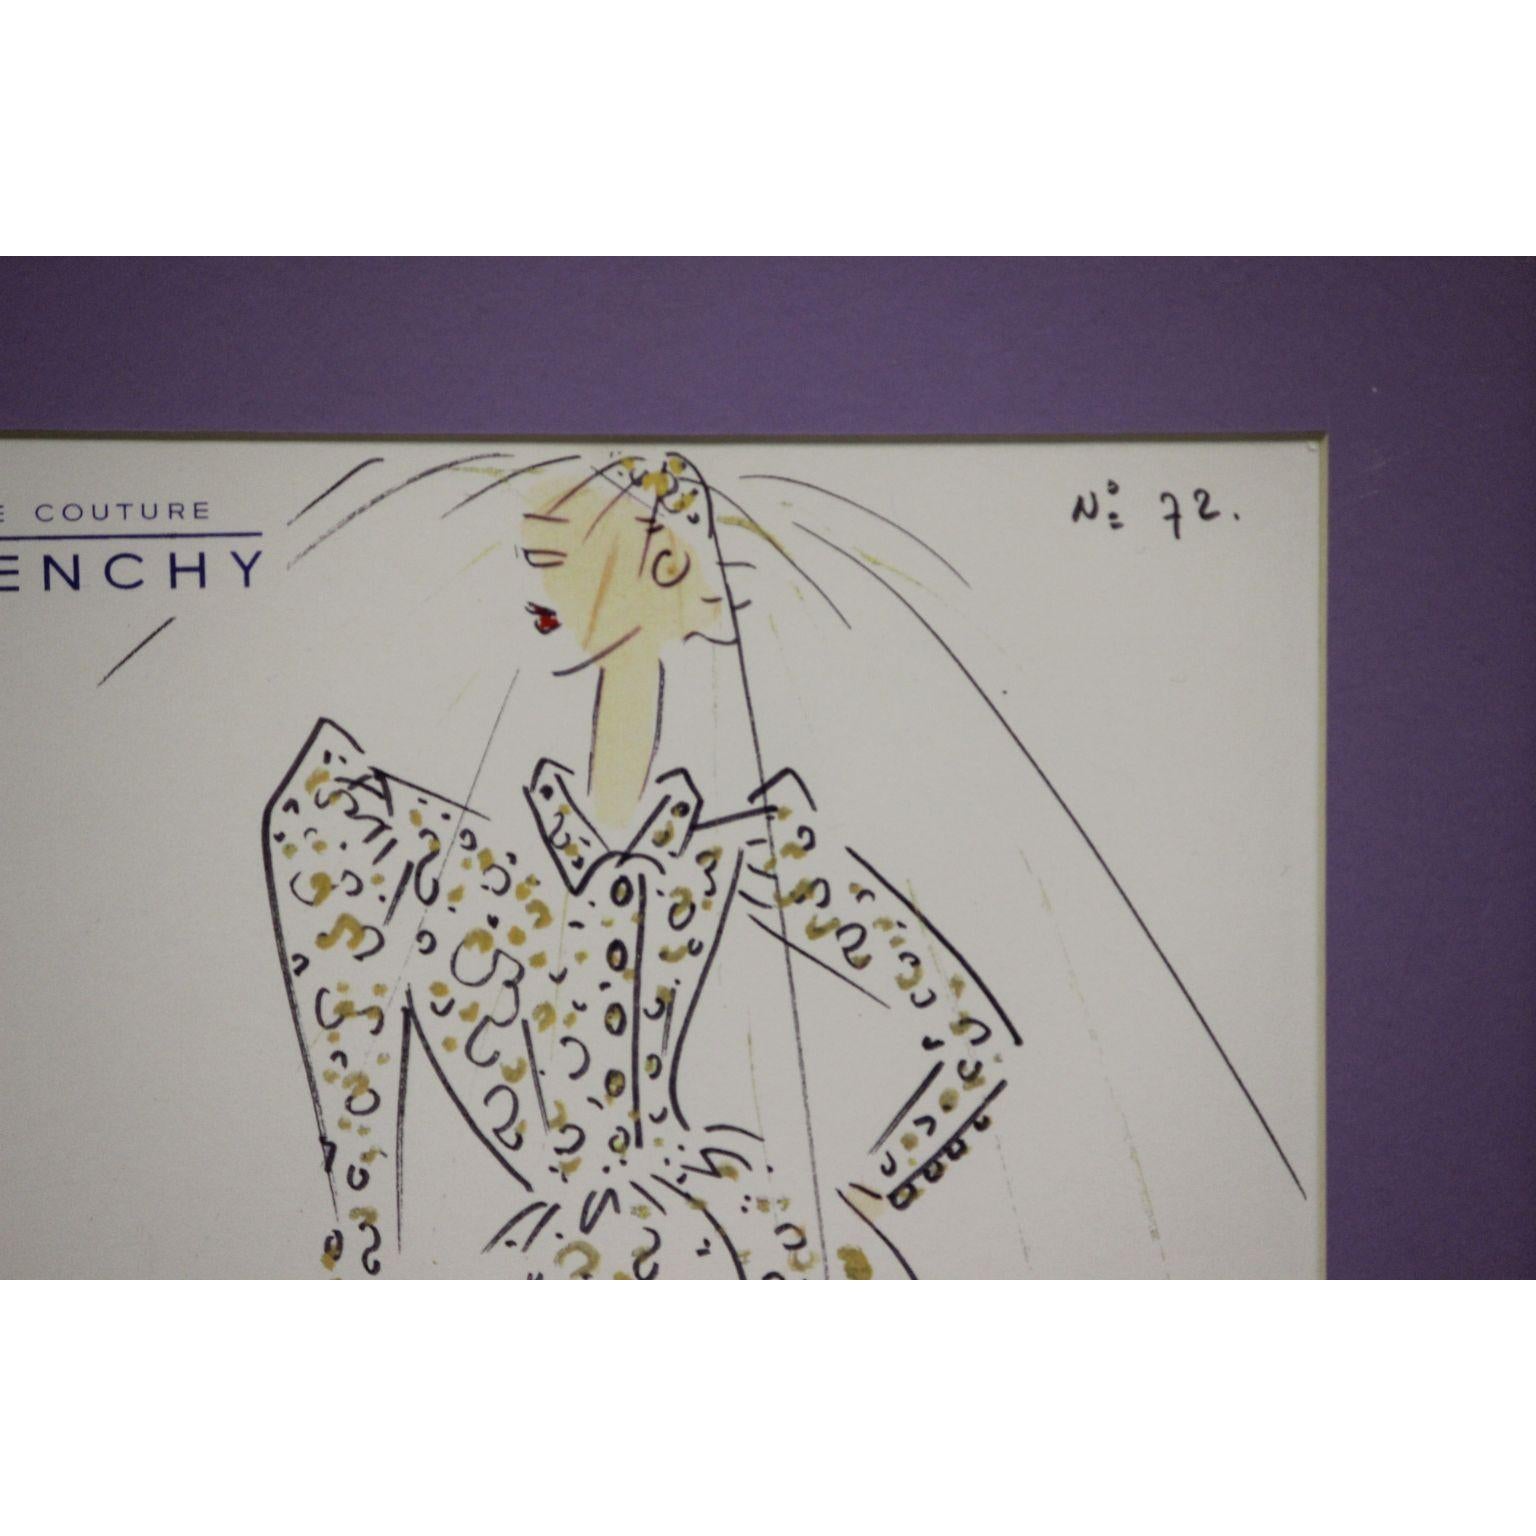 Givenchy Glam No. 72 - Black Figurative Art by Unknown